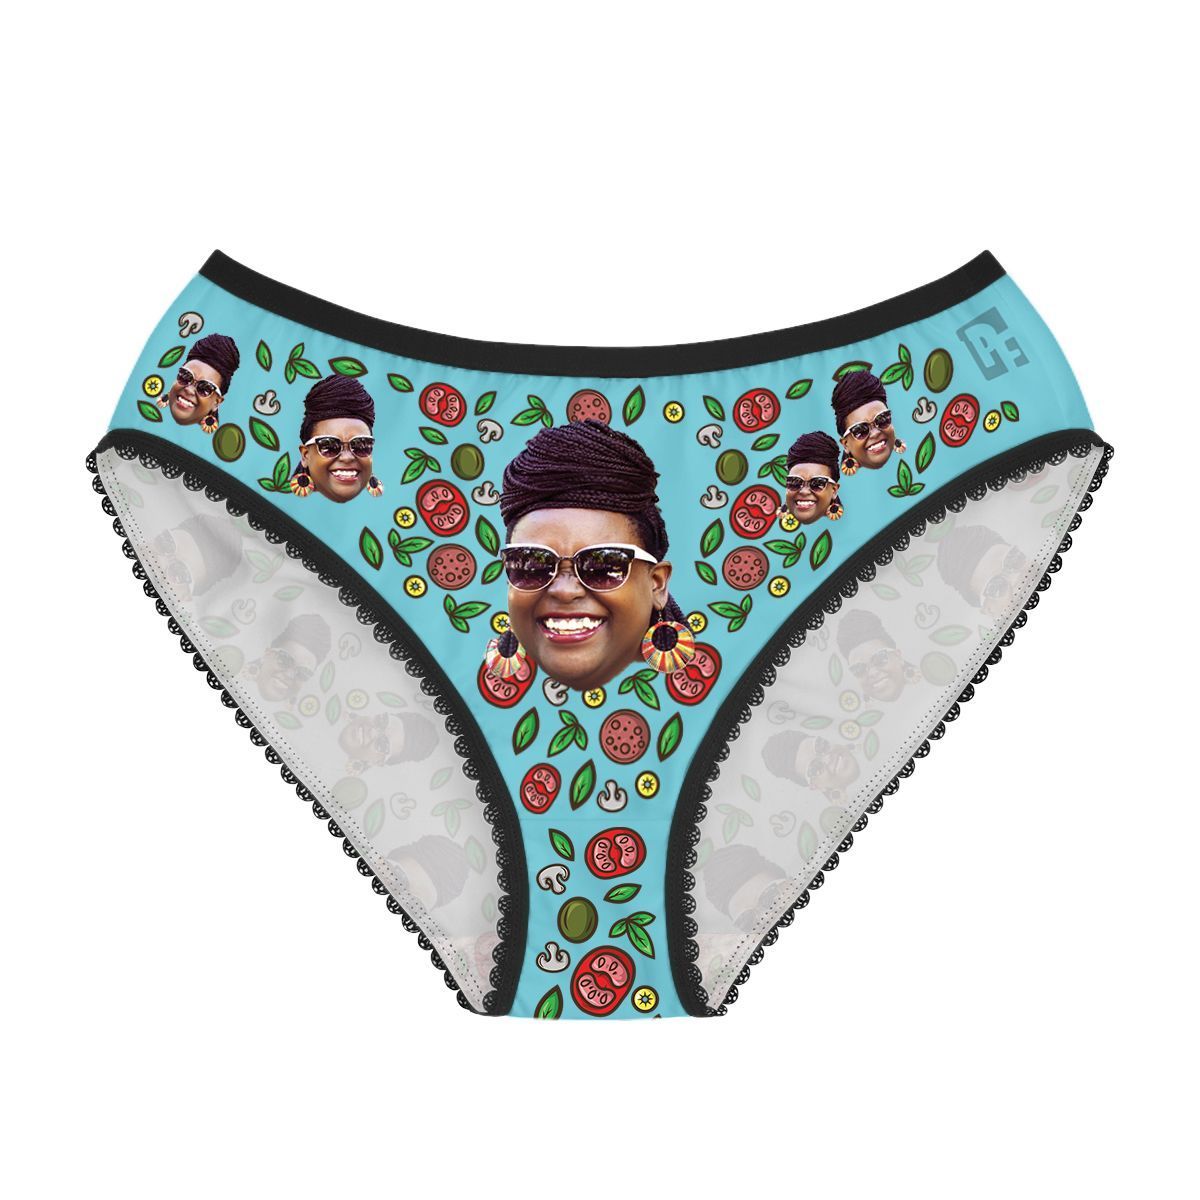 Blue Pizza women's underwear briefs personalized with photo printed on them